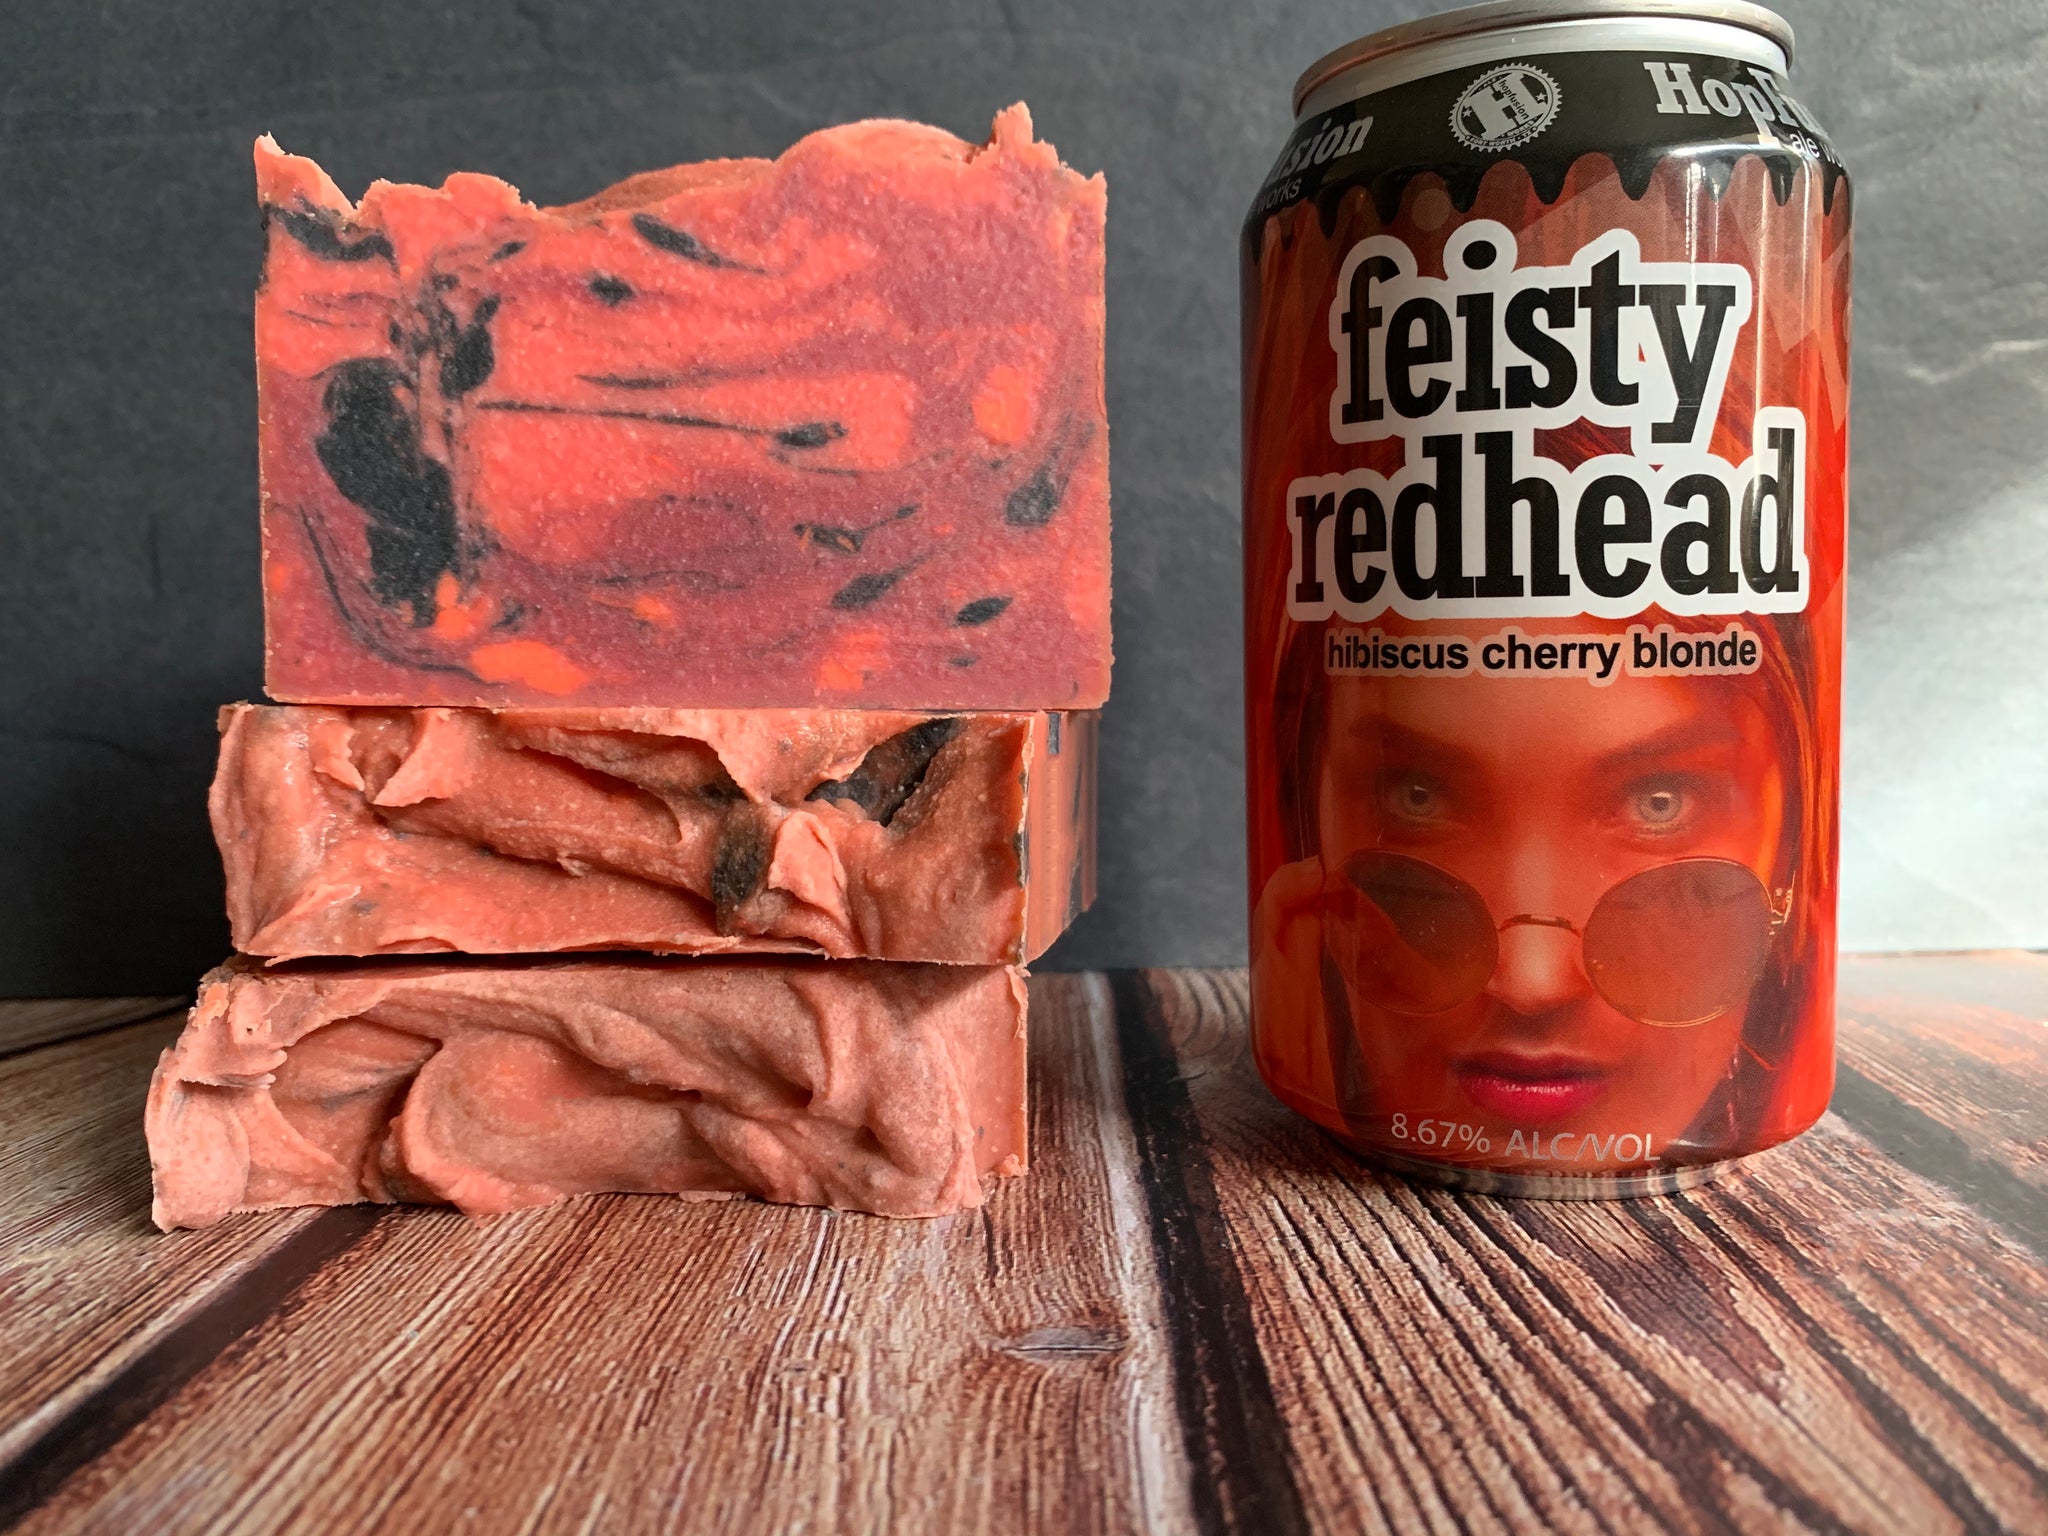 craft beer soap handmade in texas with feisty redhead hibiscus cherry blonde ale from HopFusion ale works Fort Worth texas craft brewery spunkndisorderly craft beer soap for her red and black craft beer soap